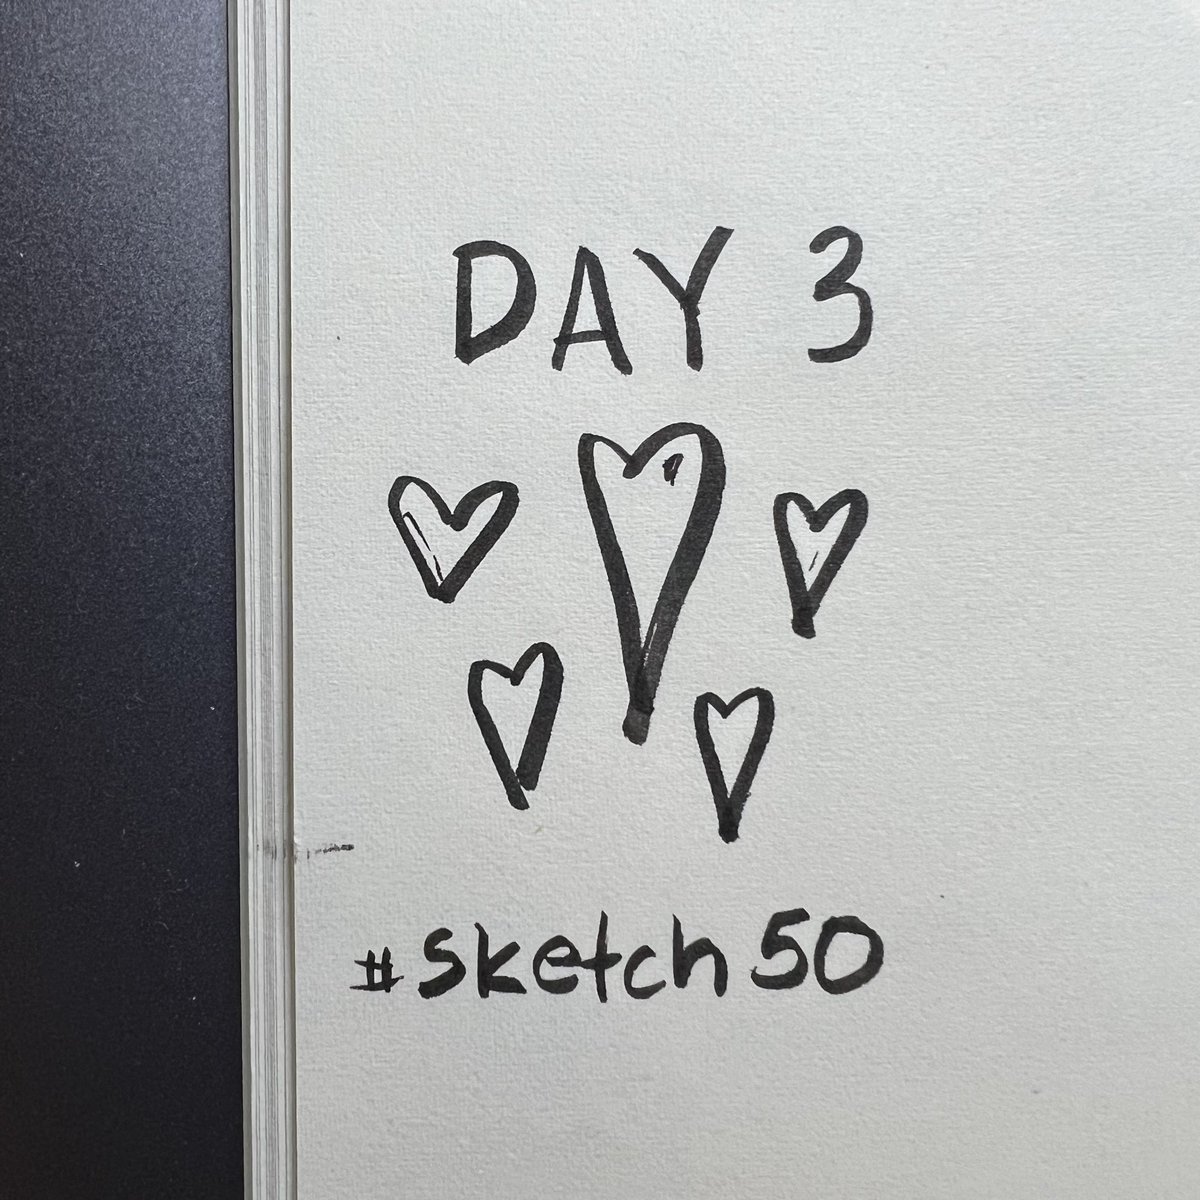 I’m so behind on #sketch50 but today is our first day of Spring Break and I really enjoyed catching up! Day 3 - heart